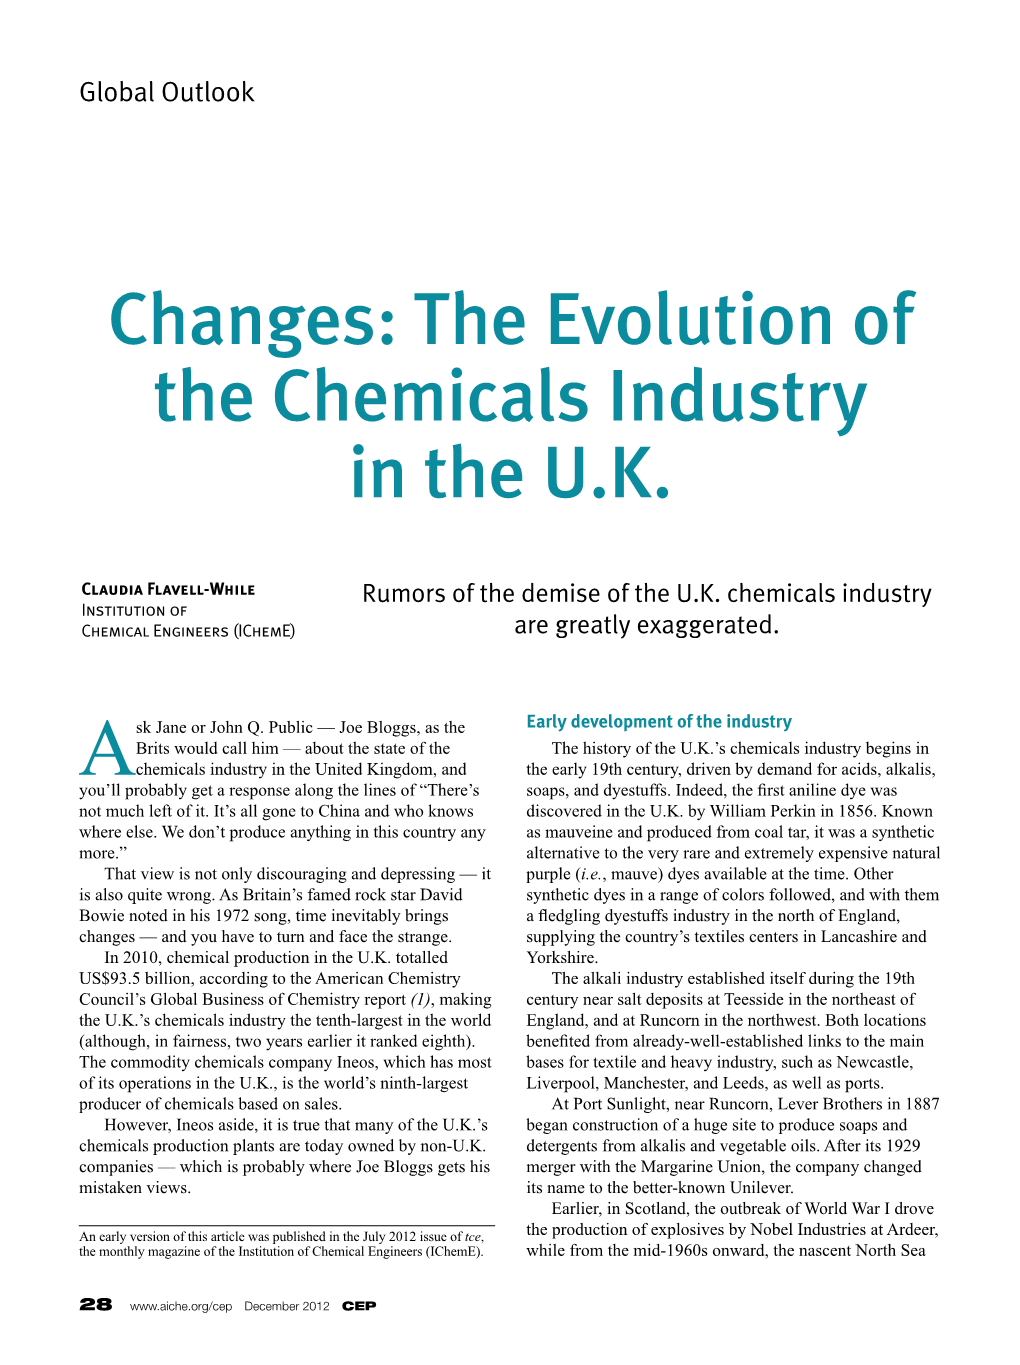 Changes: the Evolution of the Chemicals Industry in the U.K